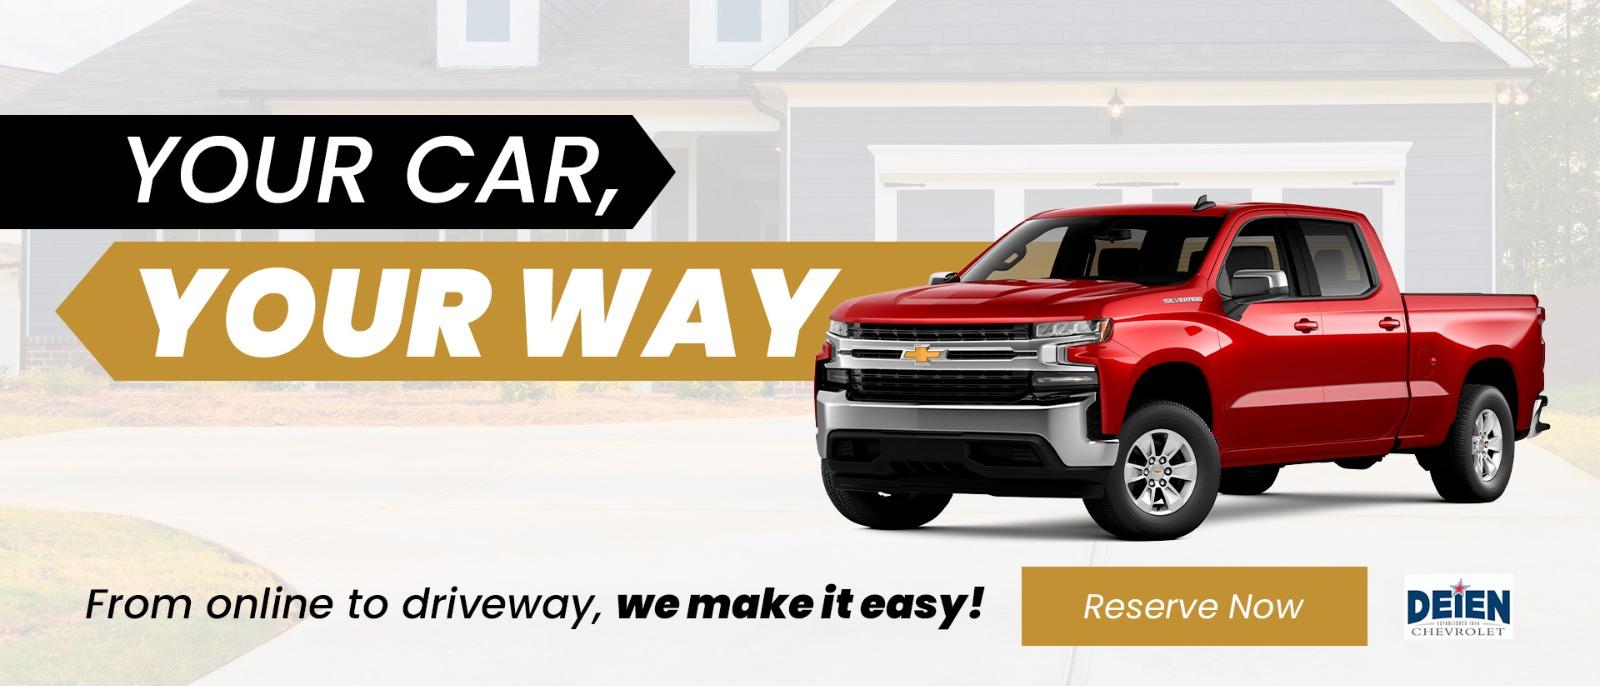 YOUR CAR, YOUR WAY From online to driveway, we make it easy!